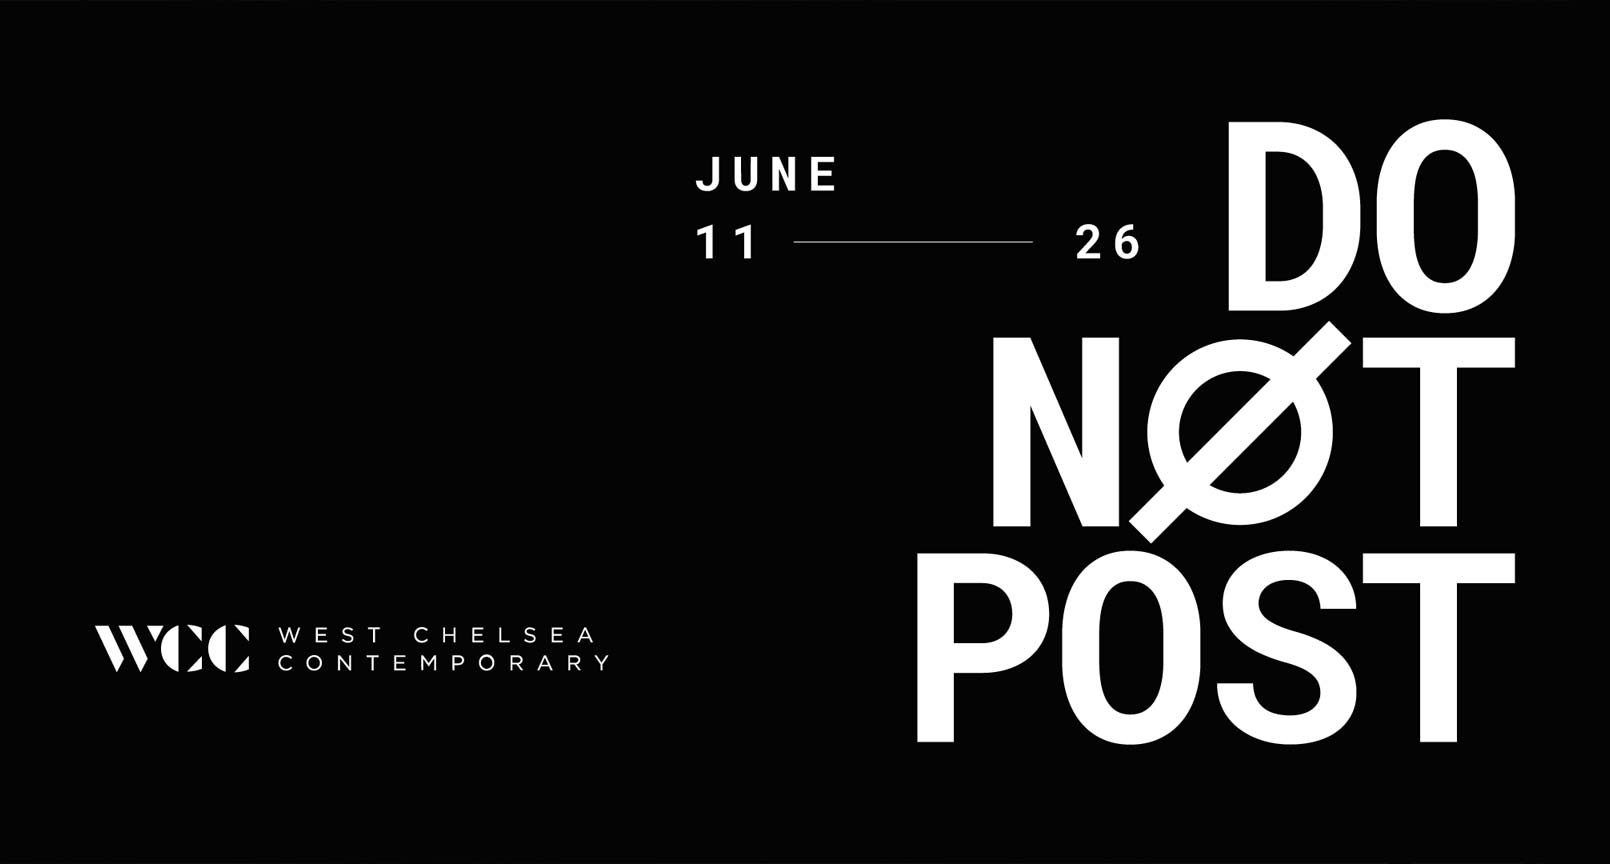 West Chelsea Contemporary key graphic design for their cryptocurrency/NFT digital art show "Do Not Post"